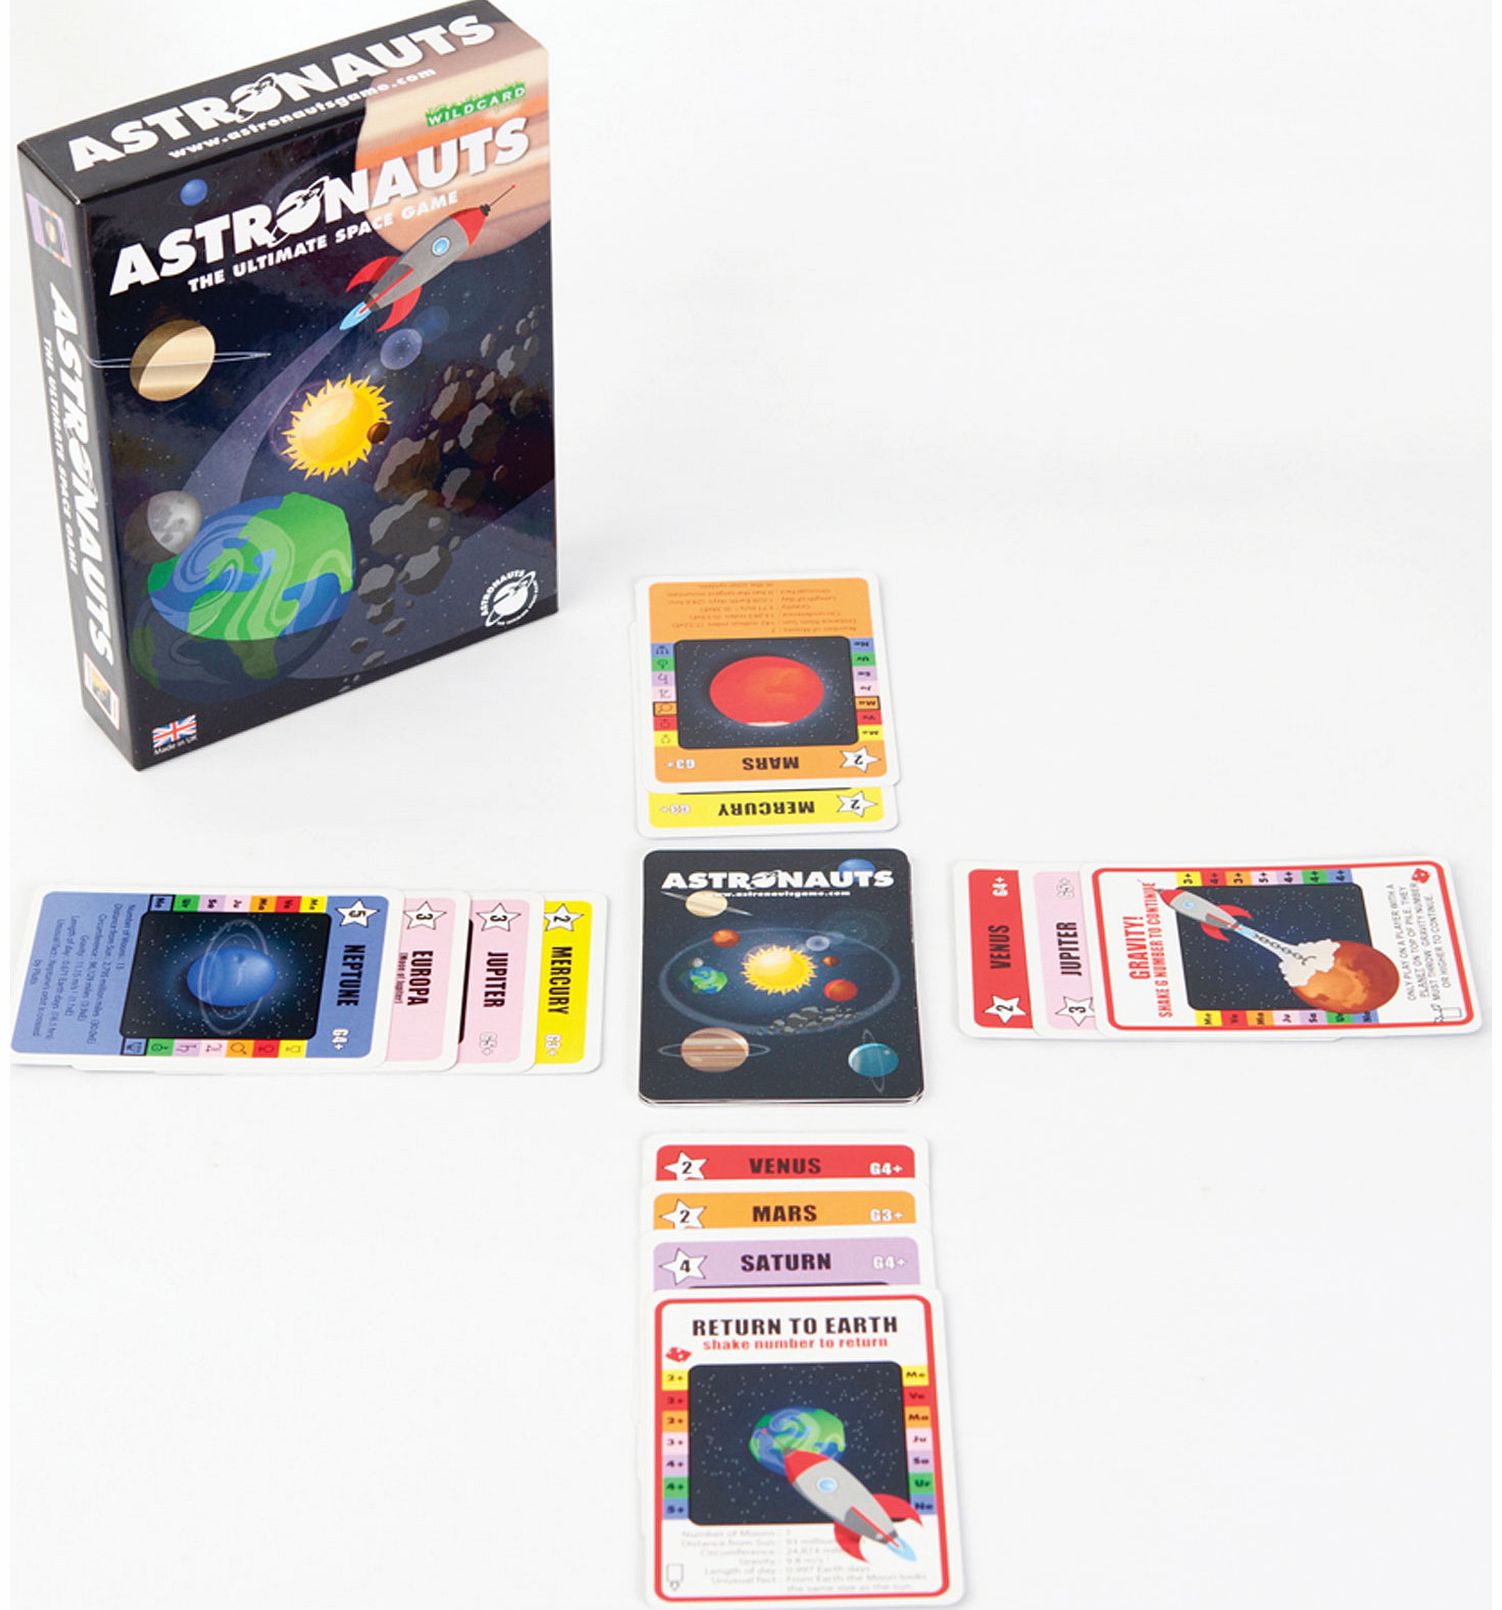 Astronauts - The Ultimate Space Game